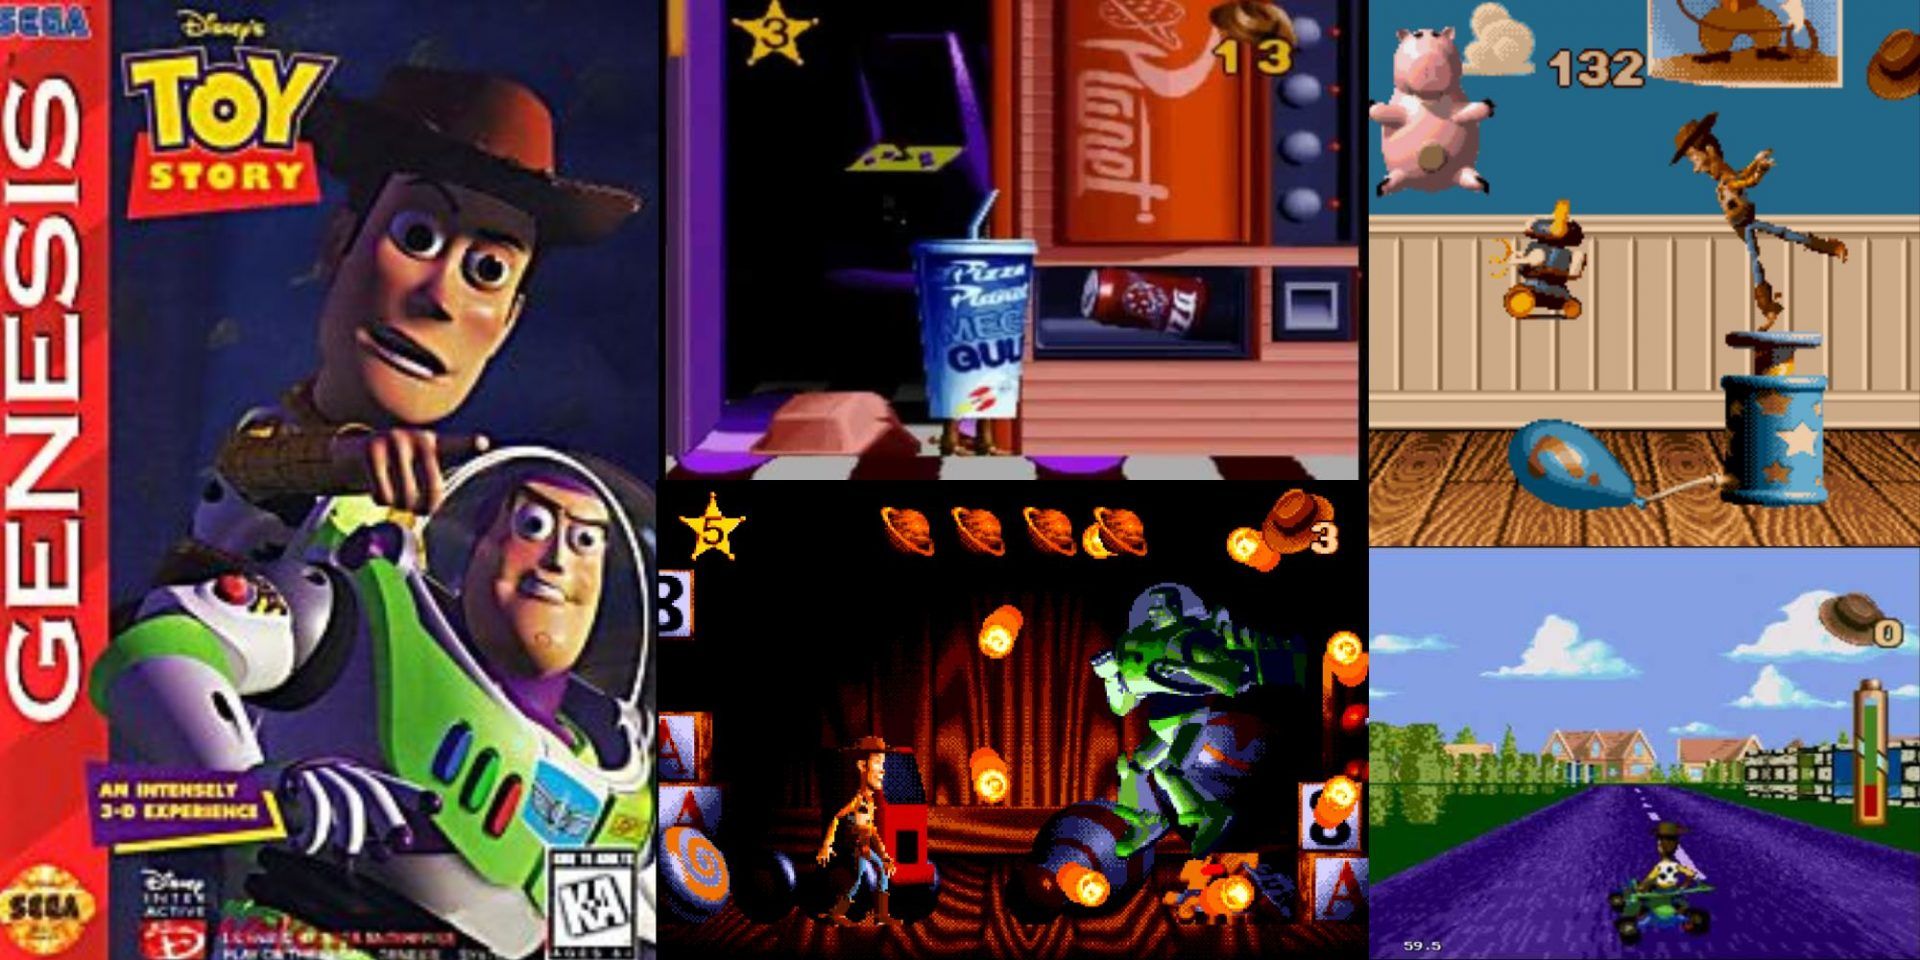 A collage of levels from Toy Story on the Genesis